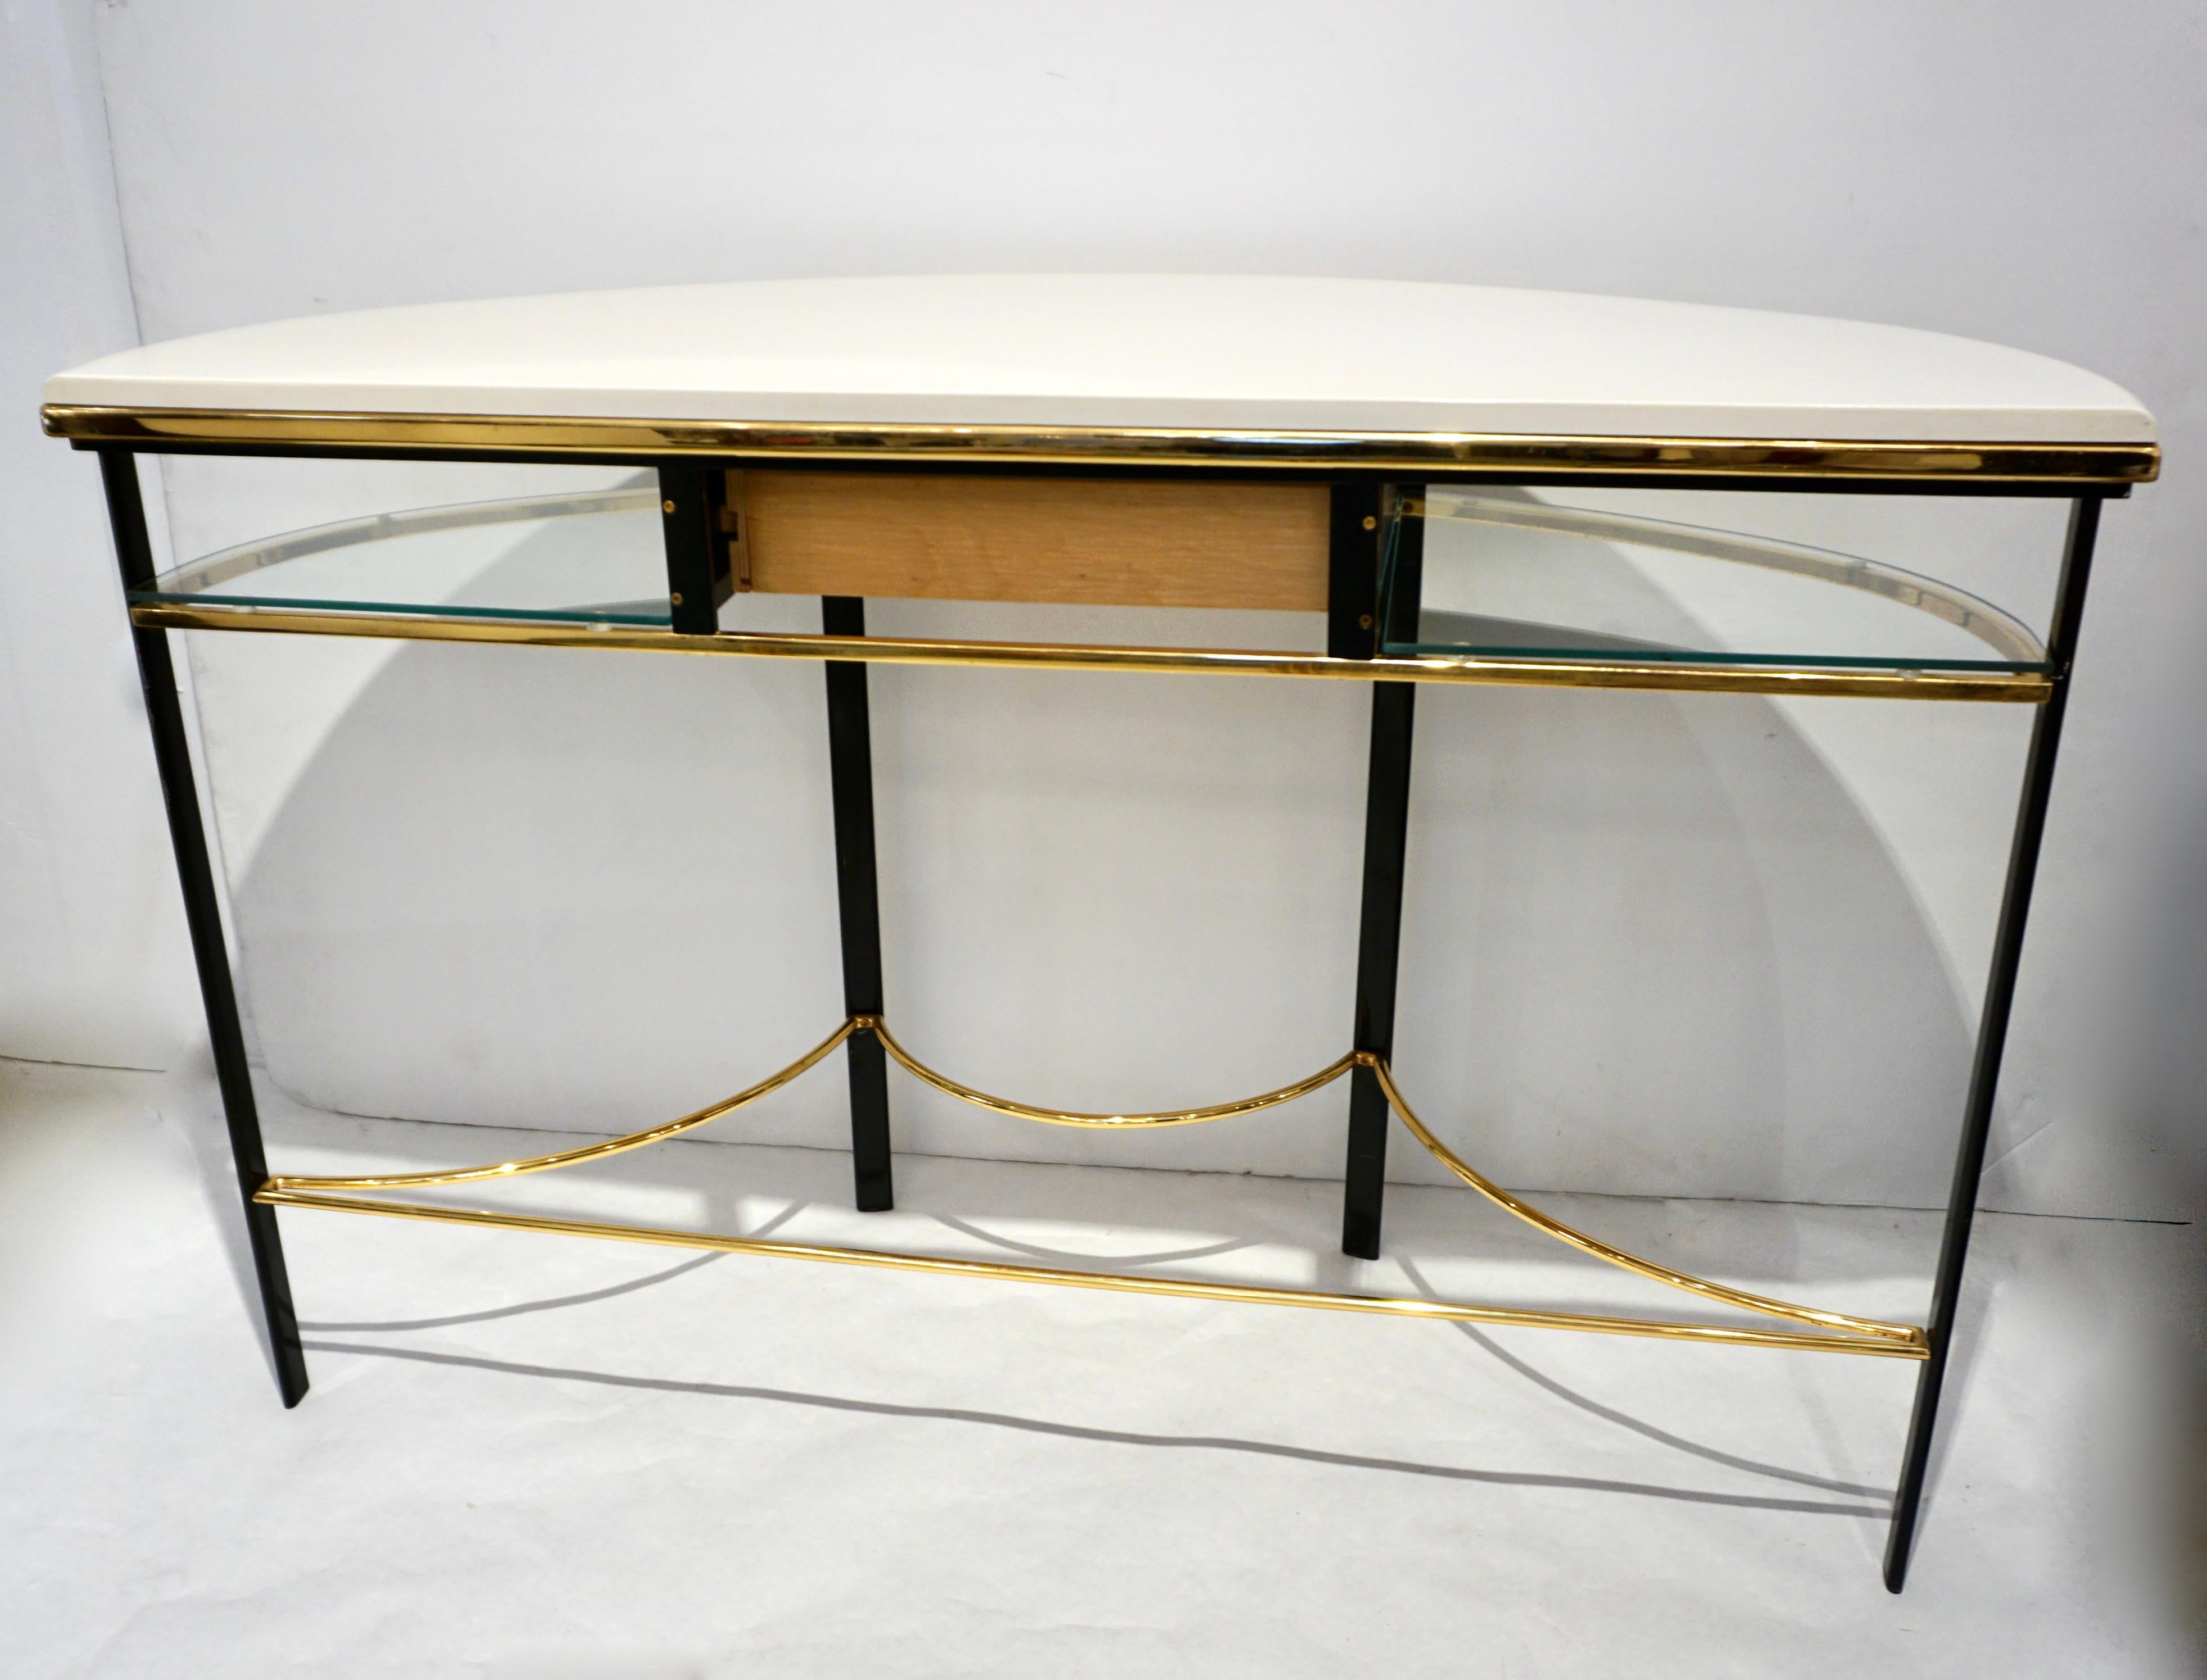 Cut Glass 1970s Vintage Italian One-Drawer Black & Cream Lacquered Brass Demi Lune Console